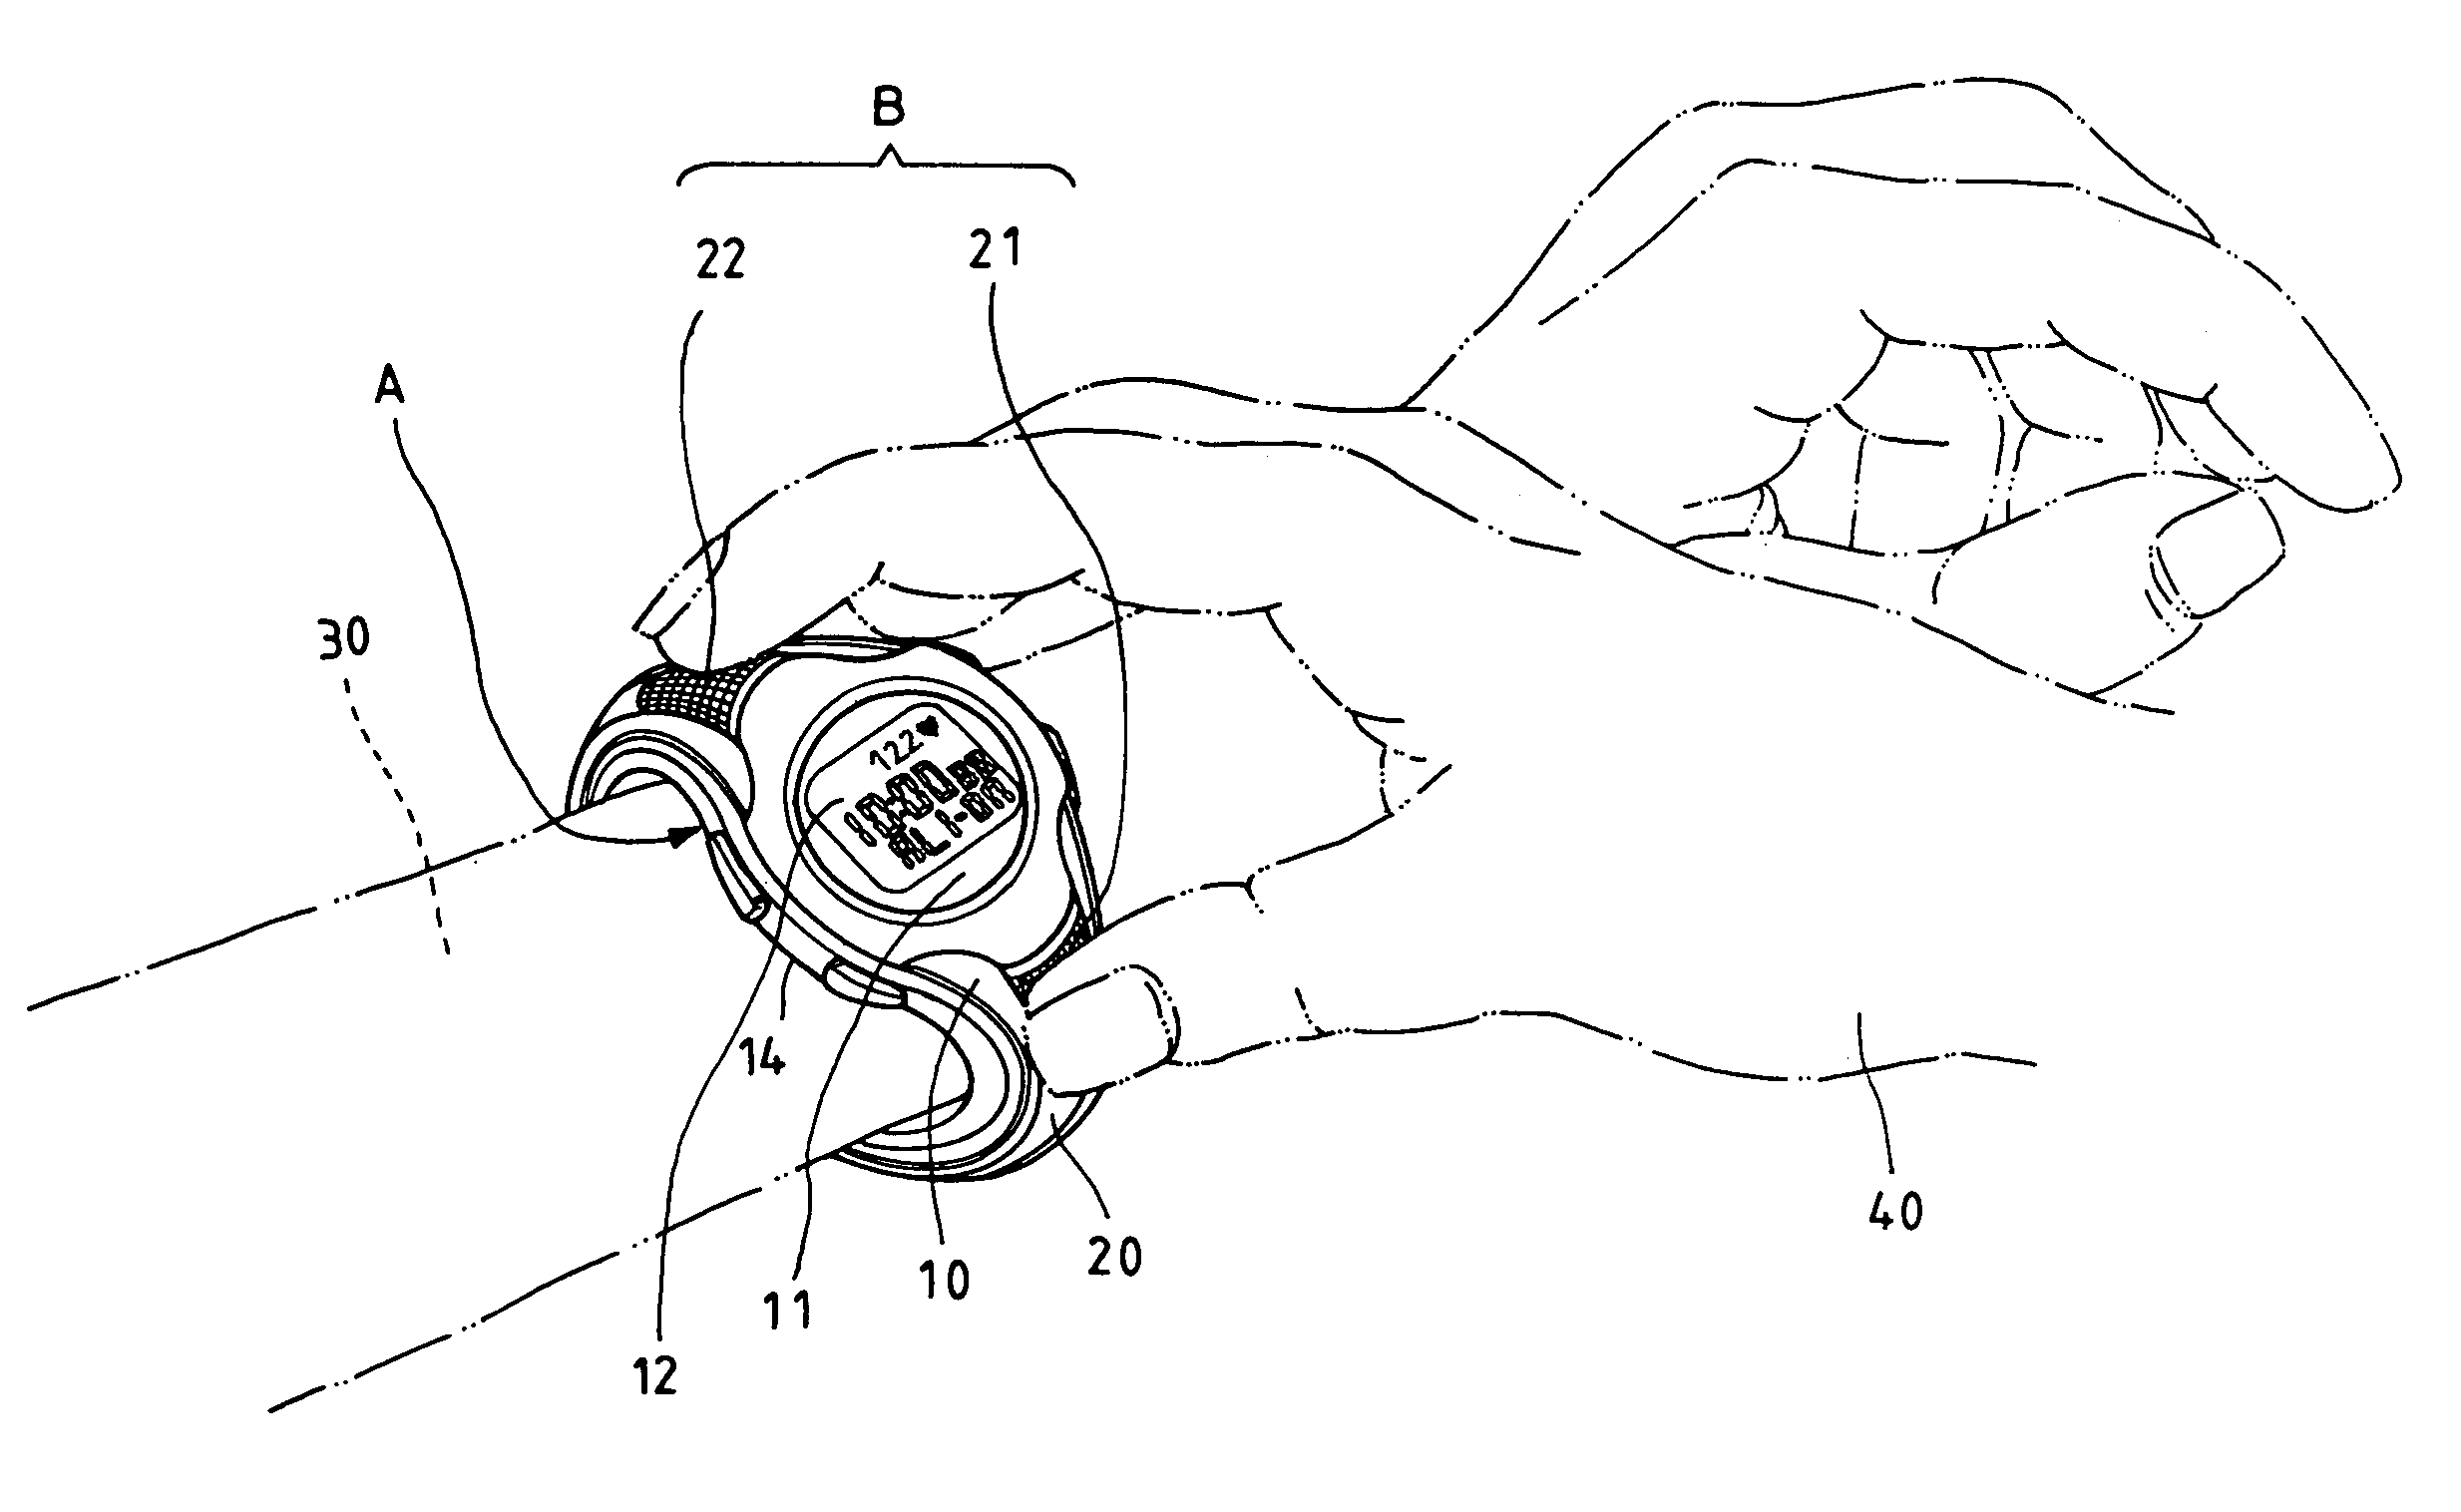 Wristwatch with the function of sensing heart pulses